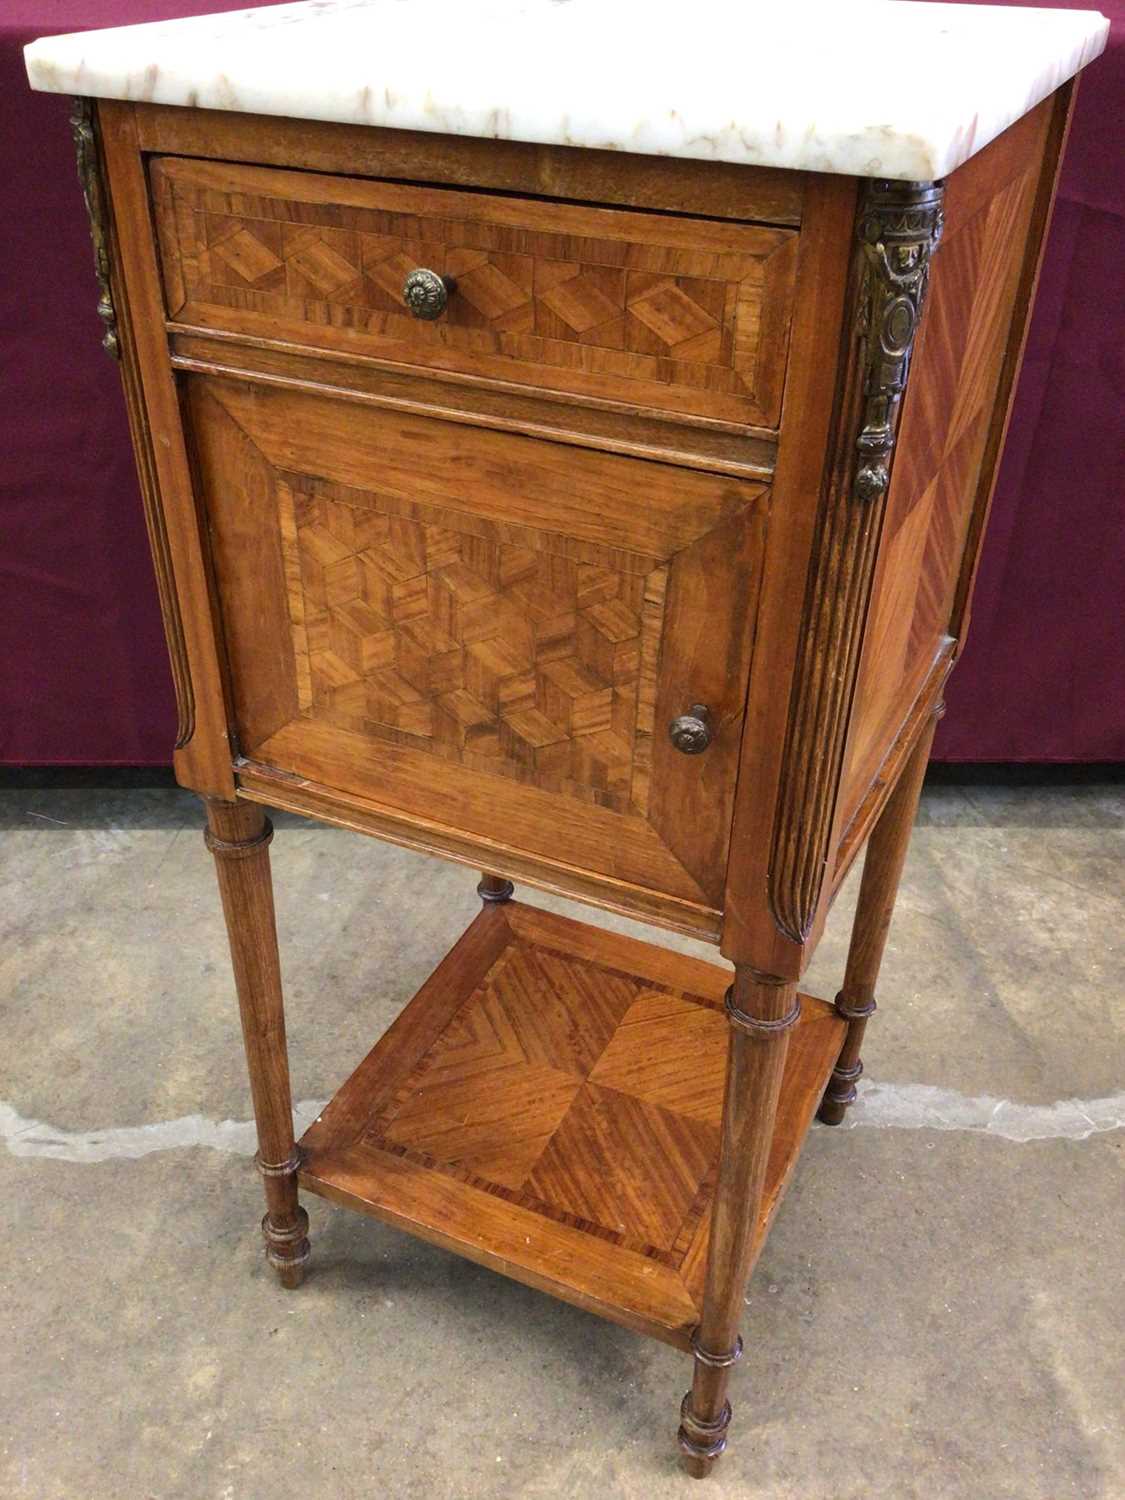 Early 20th century French parquetry bedside cupboard with marble top and unusual ceramic liner fitte - Image 5 of 7